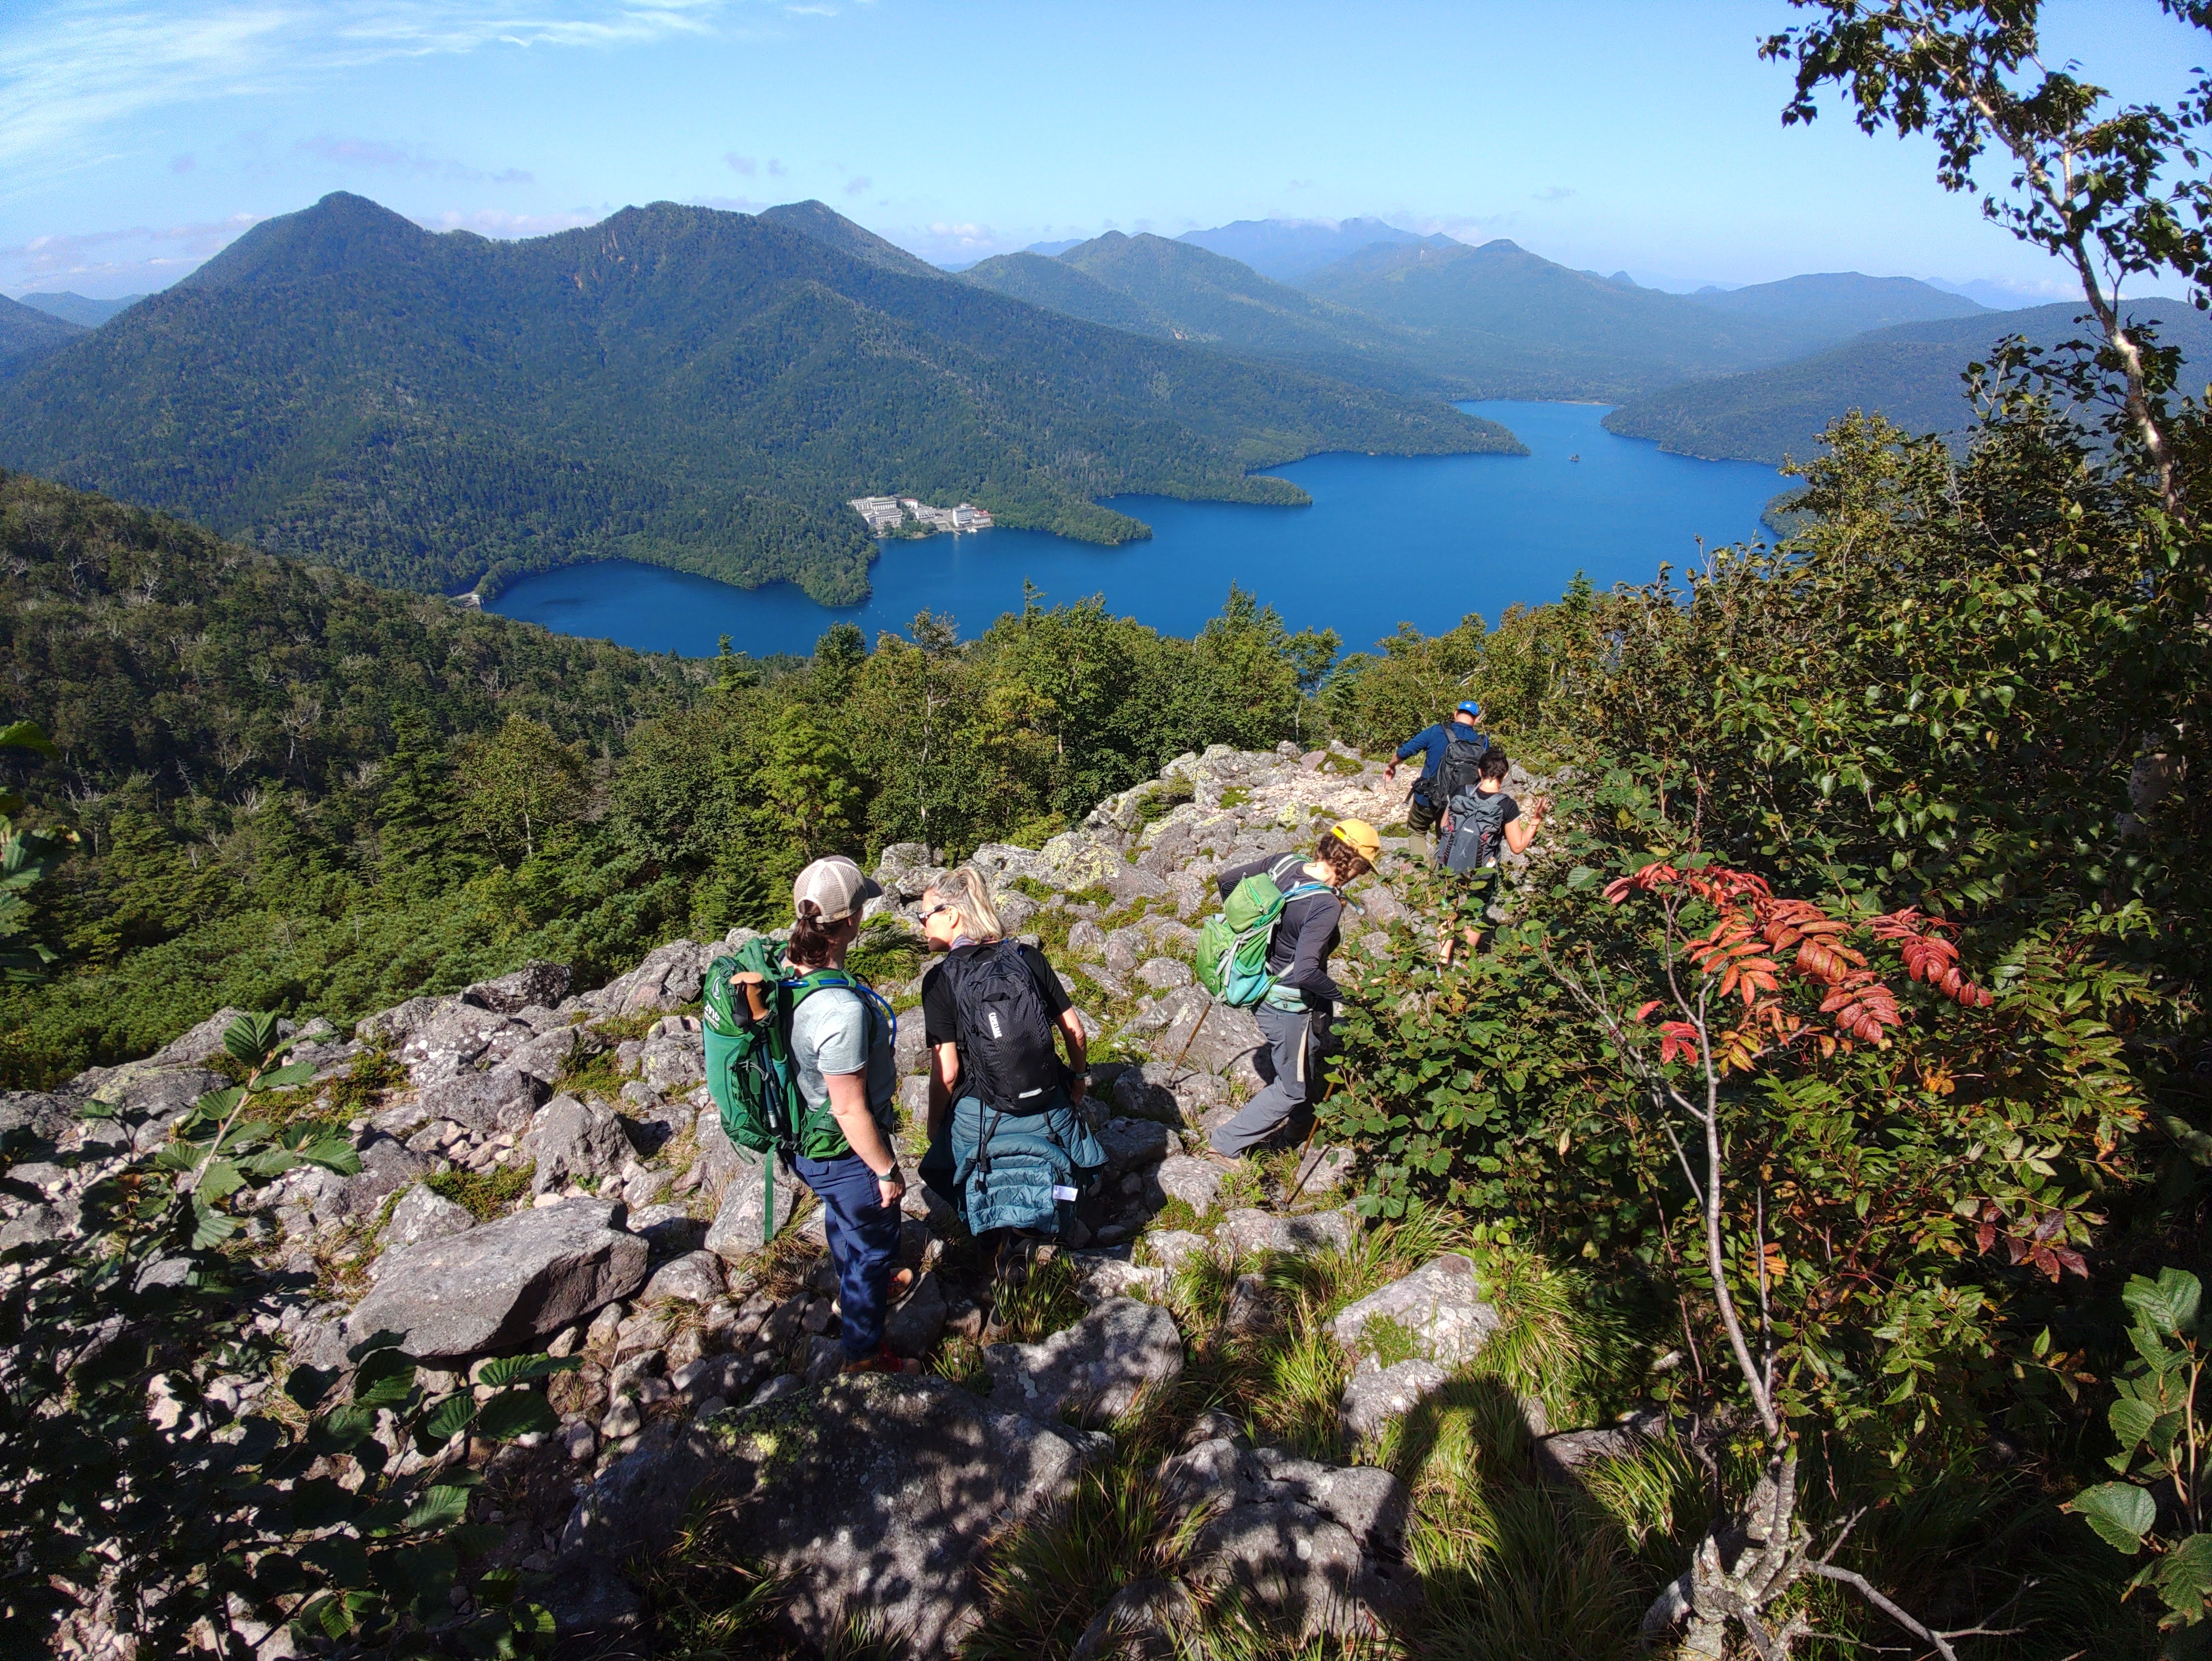 Hikers begin to descend from the rocky summit of Mt. Hakuunzan in the Daisetsuzan National Park. It is a clear day and Lake Shikaribetsu stretches out below the open summit area.